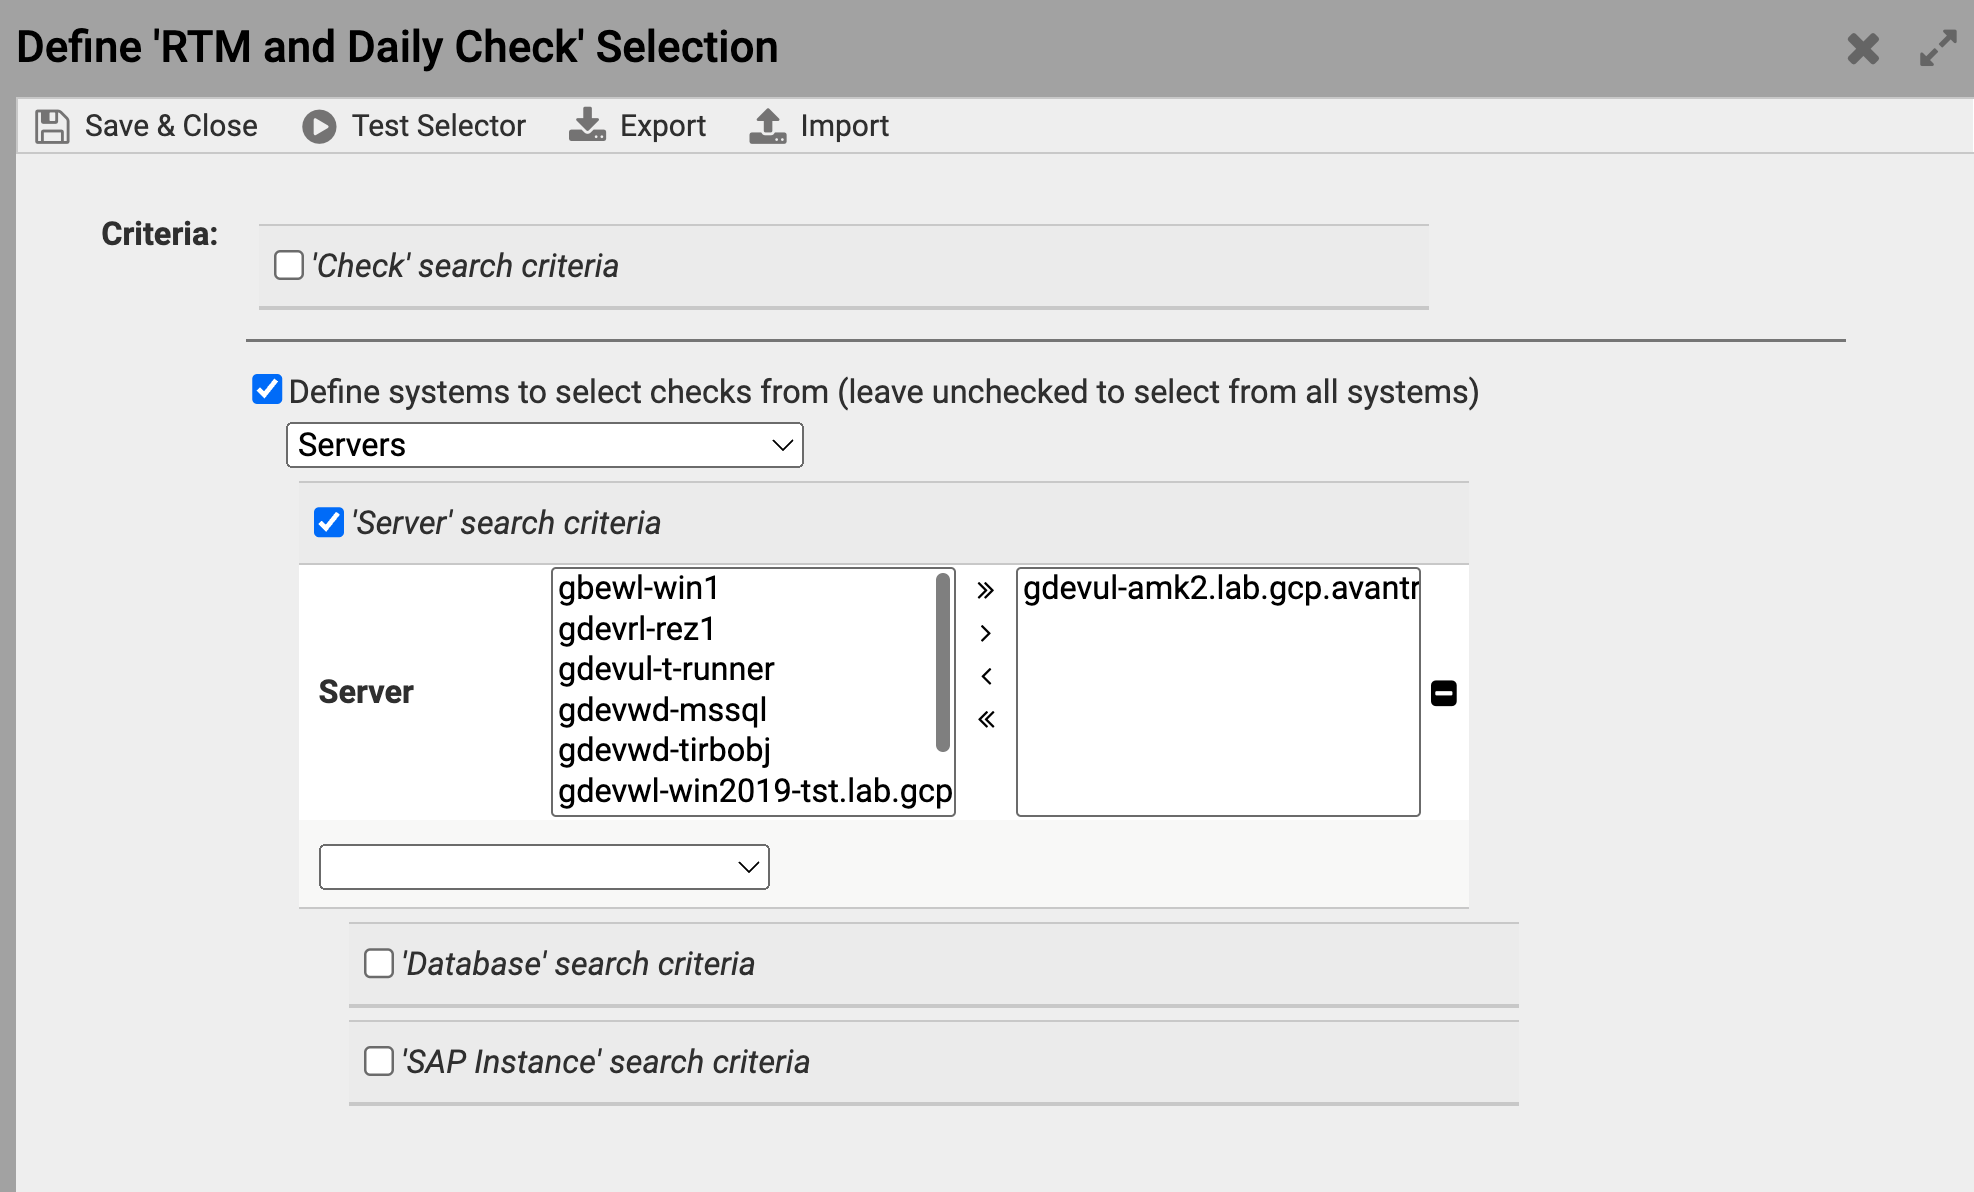 An example of how to create an ad-hoc check selector